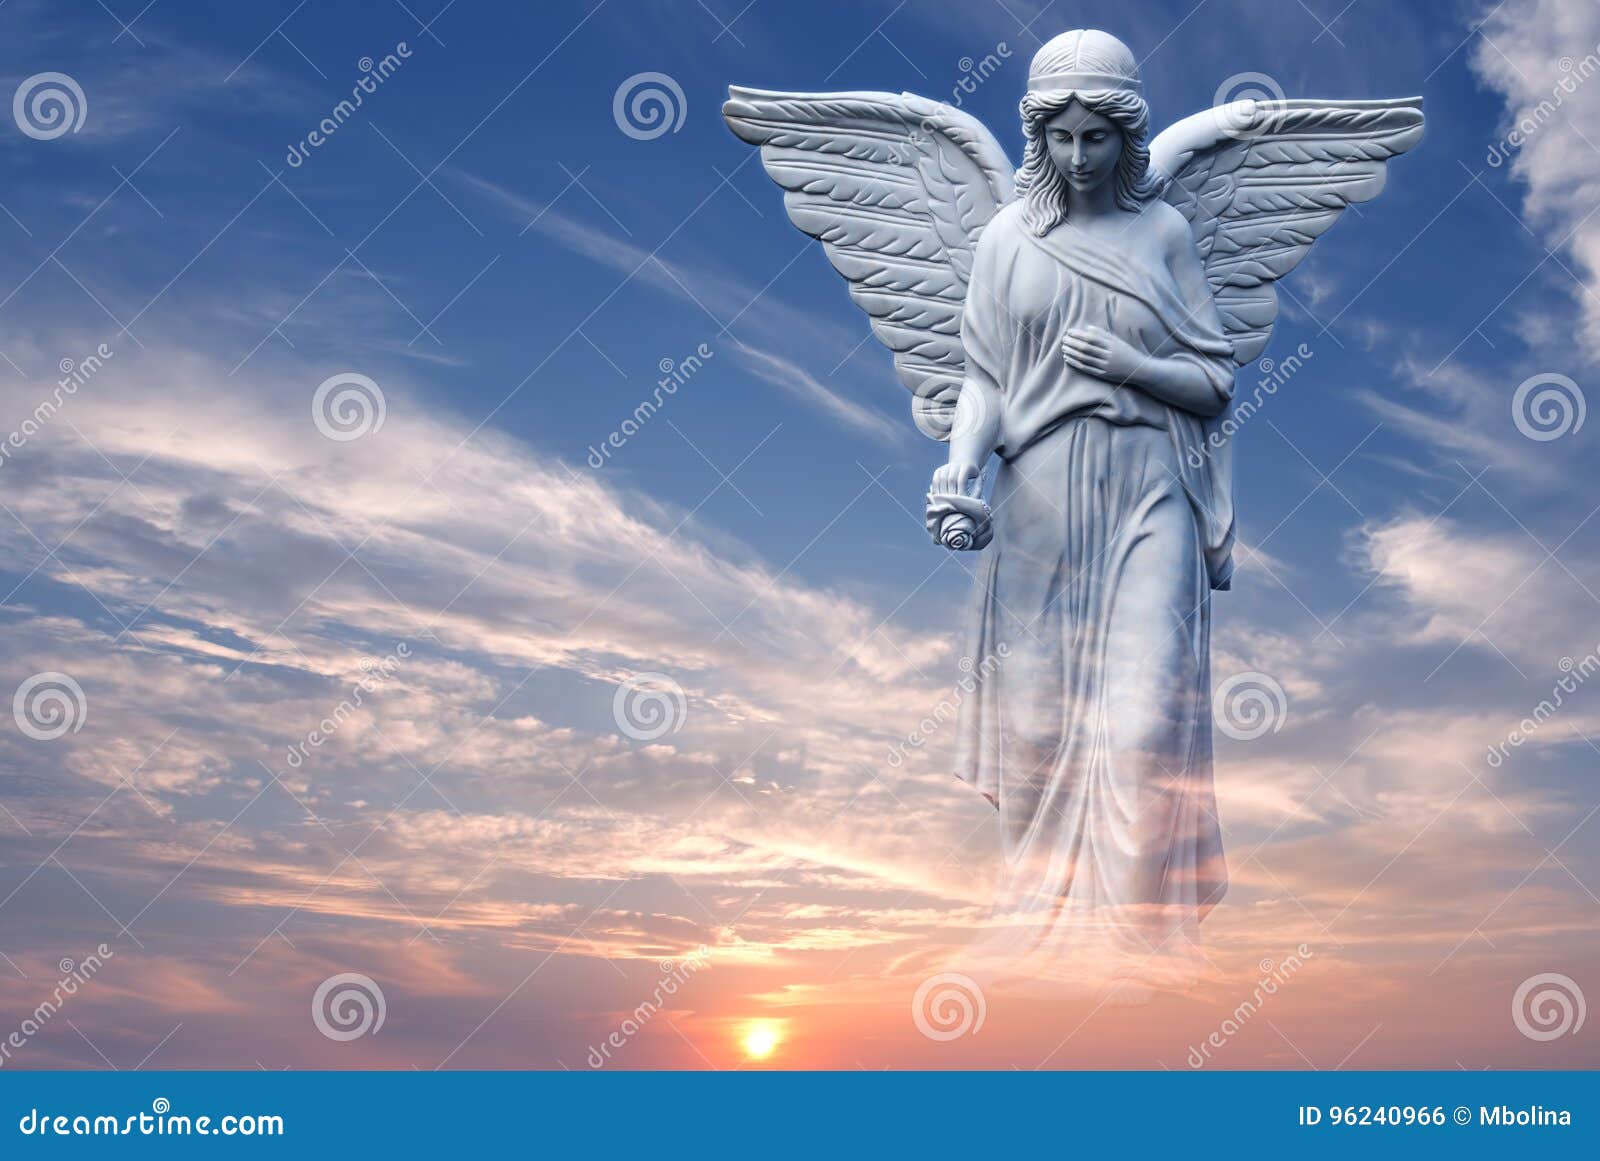 Angel in Heaven Over Beautiful Sunset Stock Photo - Image of ...